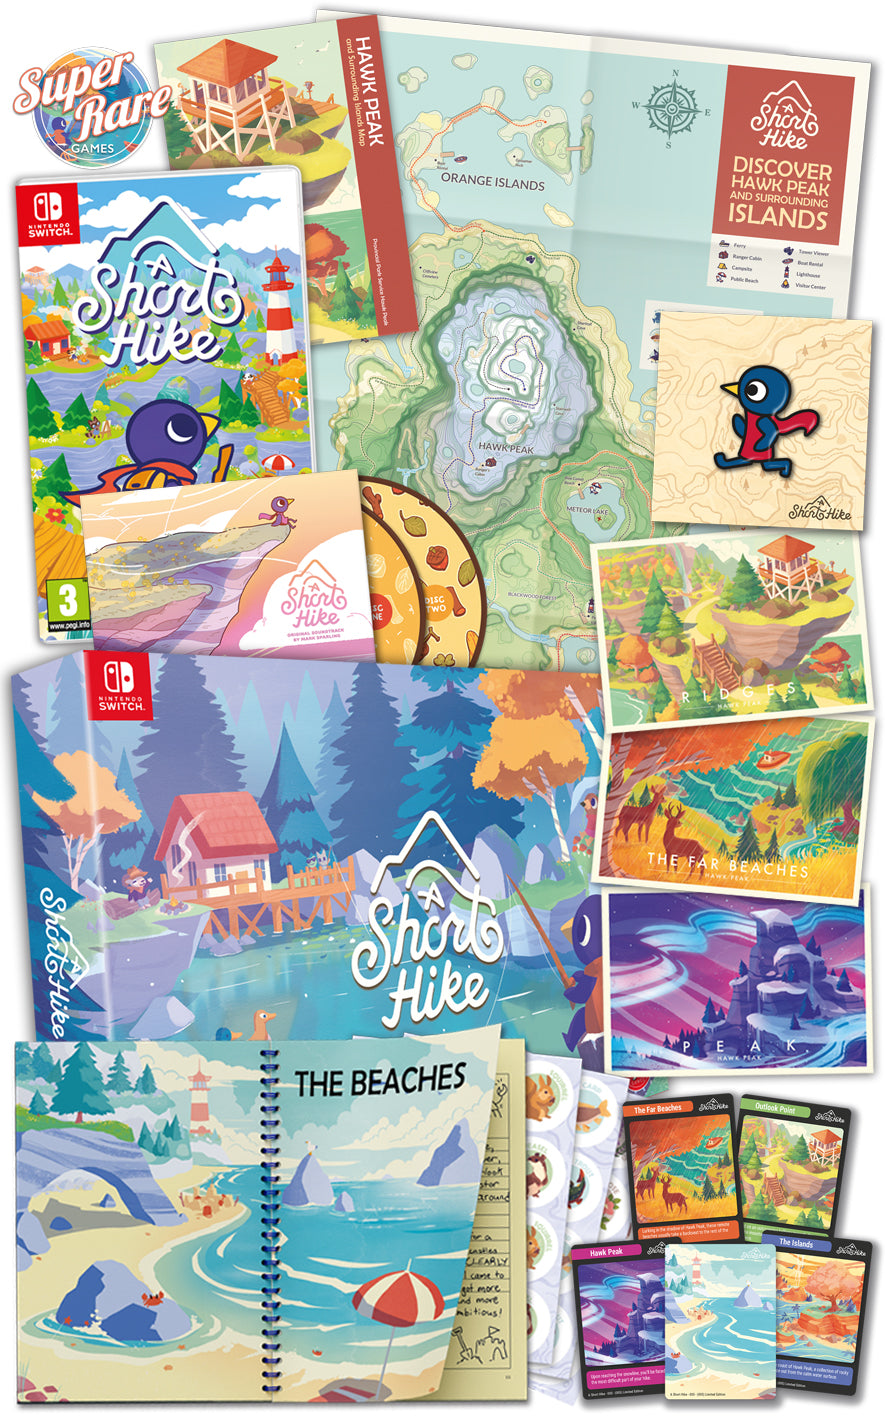 [Collector's Edition] CE#9: A Short Hike (Switch)